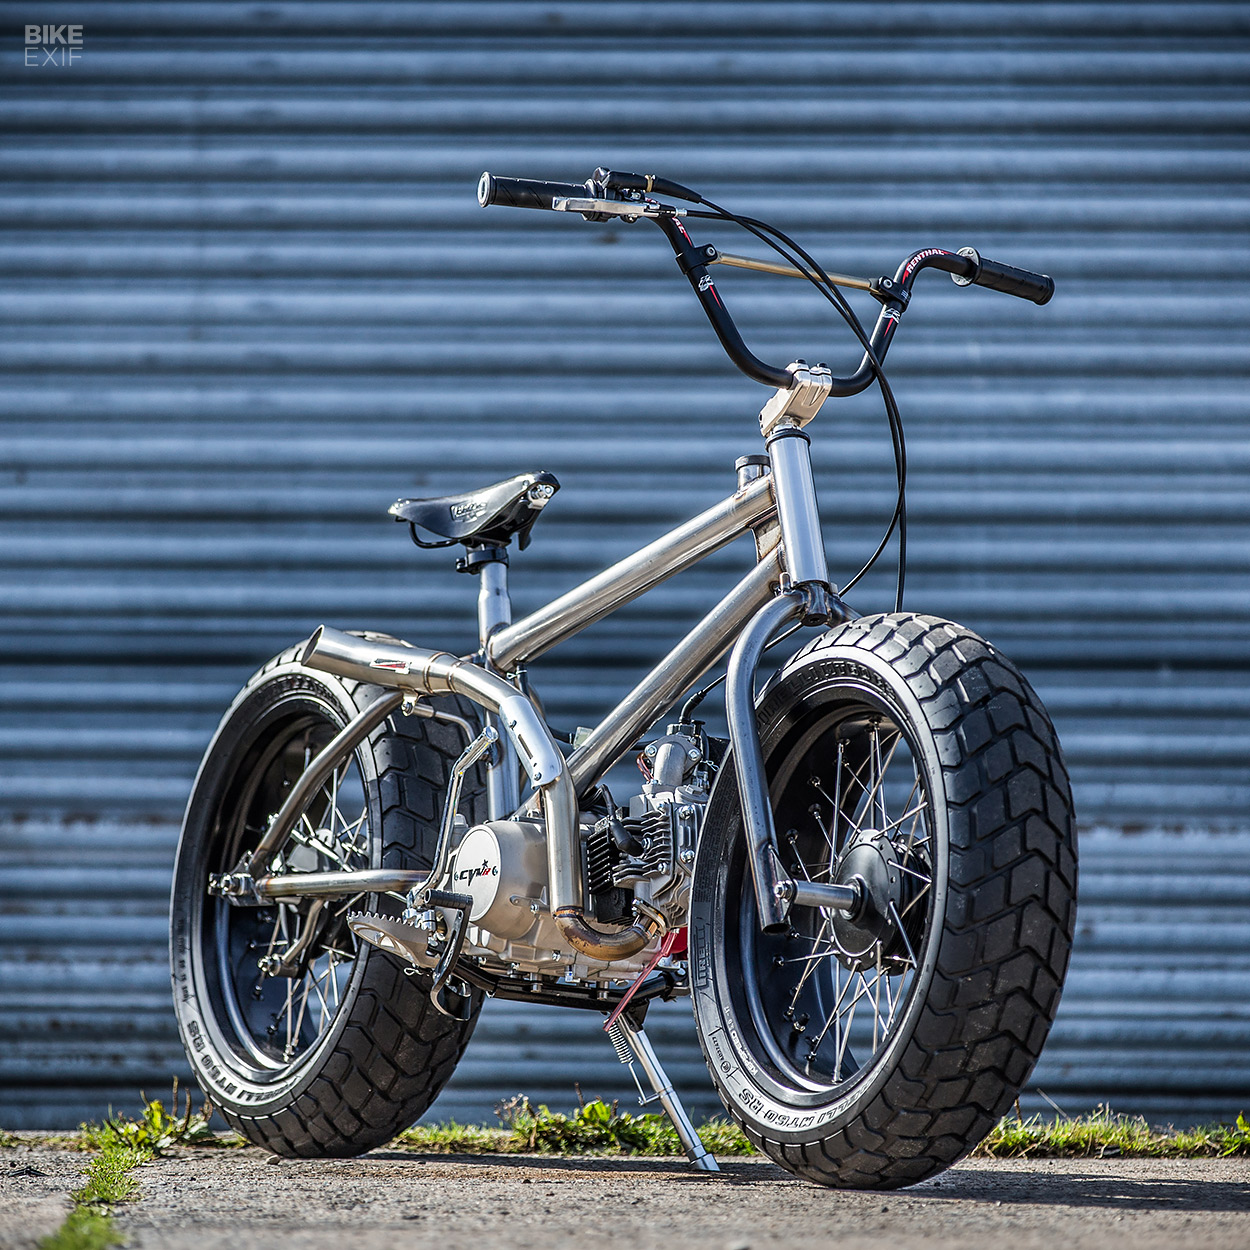 Fat Tracker: A motorized bicycle for BMX fans